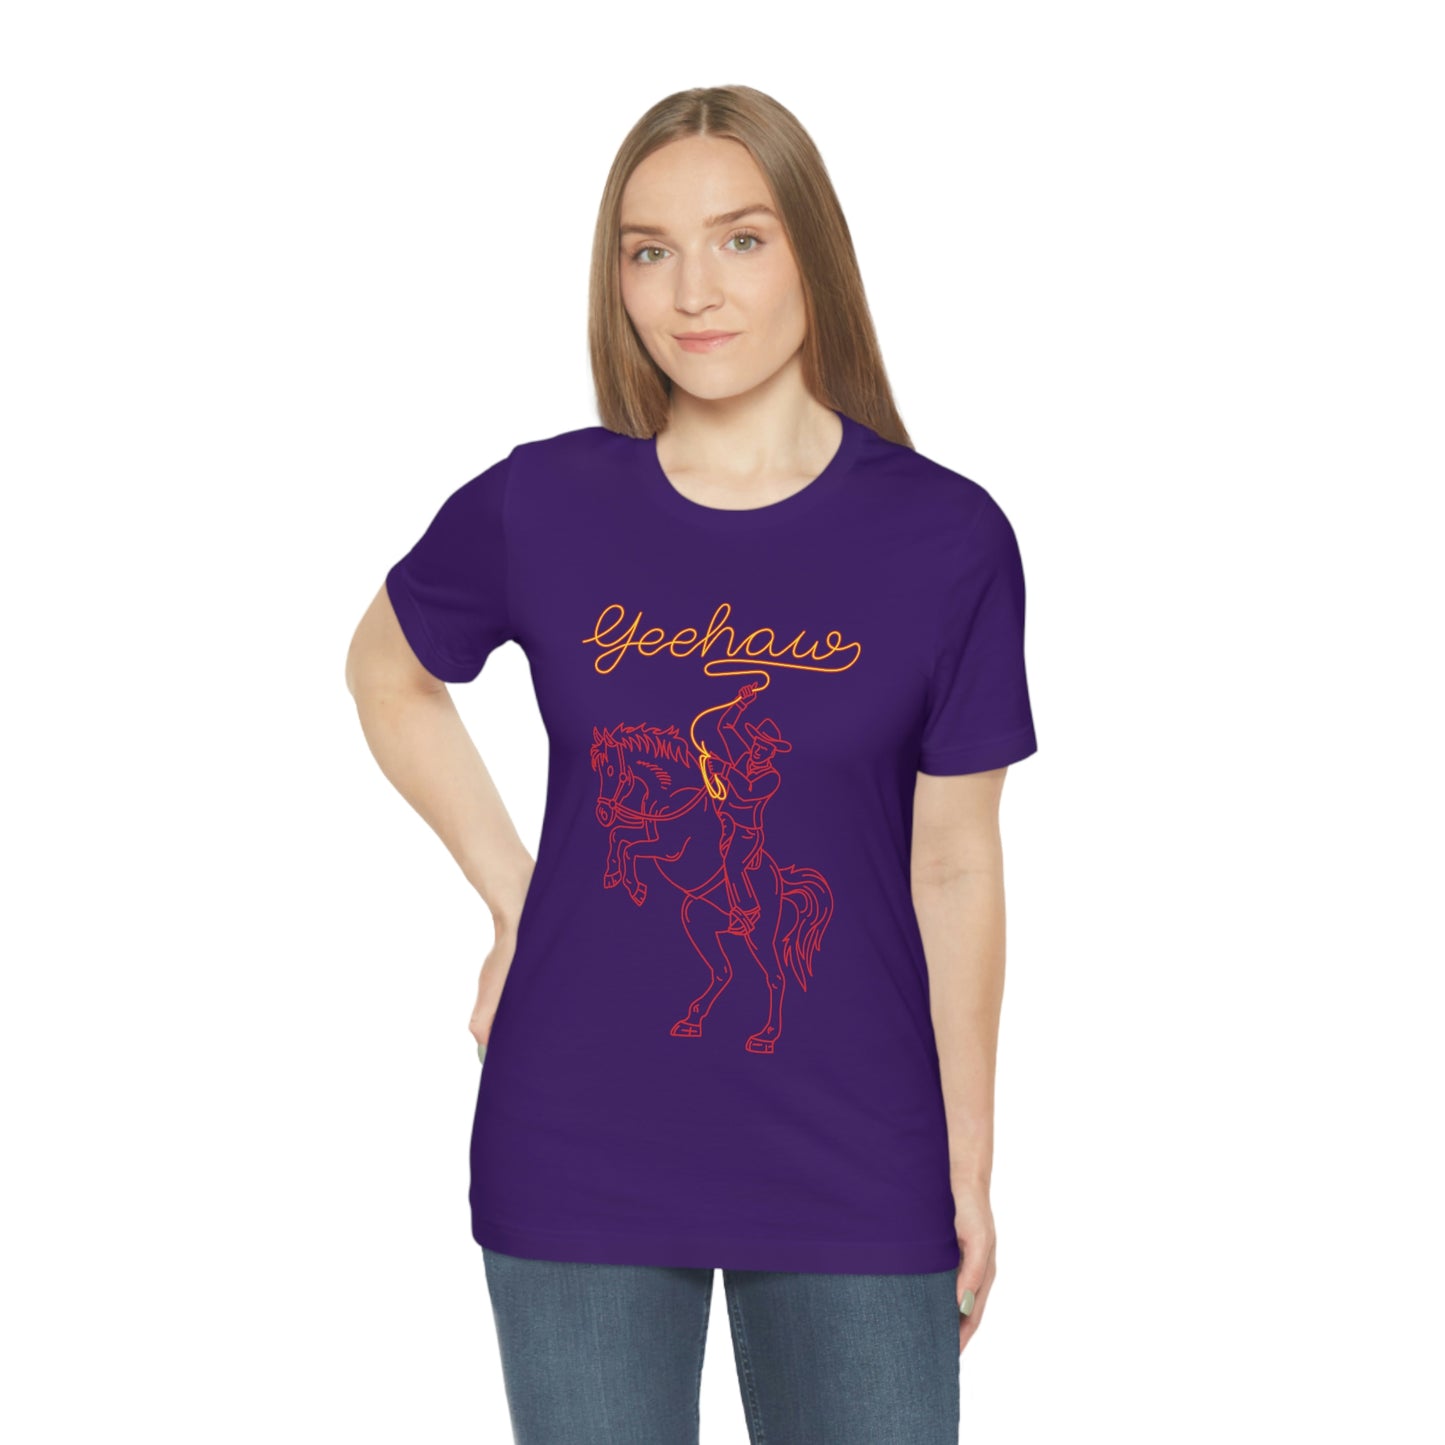 Purple T-Shirt featuring a neon design of a cowboy with a lasso saying 'yeehaw' in yellow and red, from the TEQNEON Word Craft collection